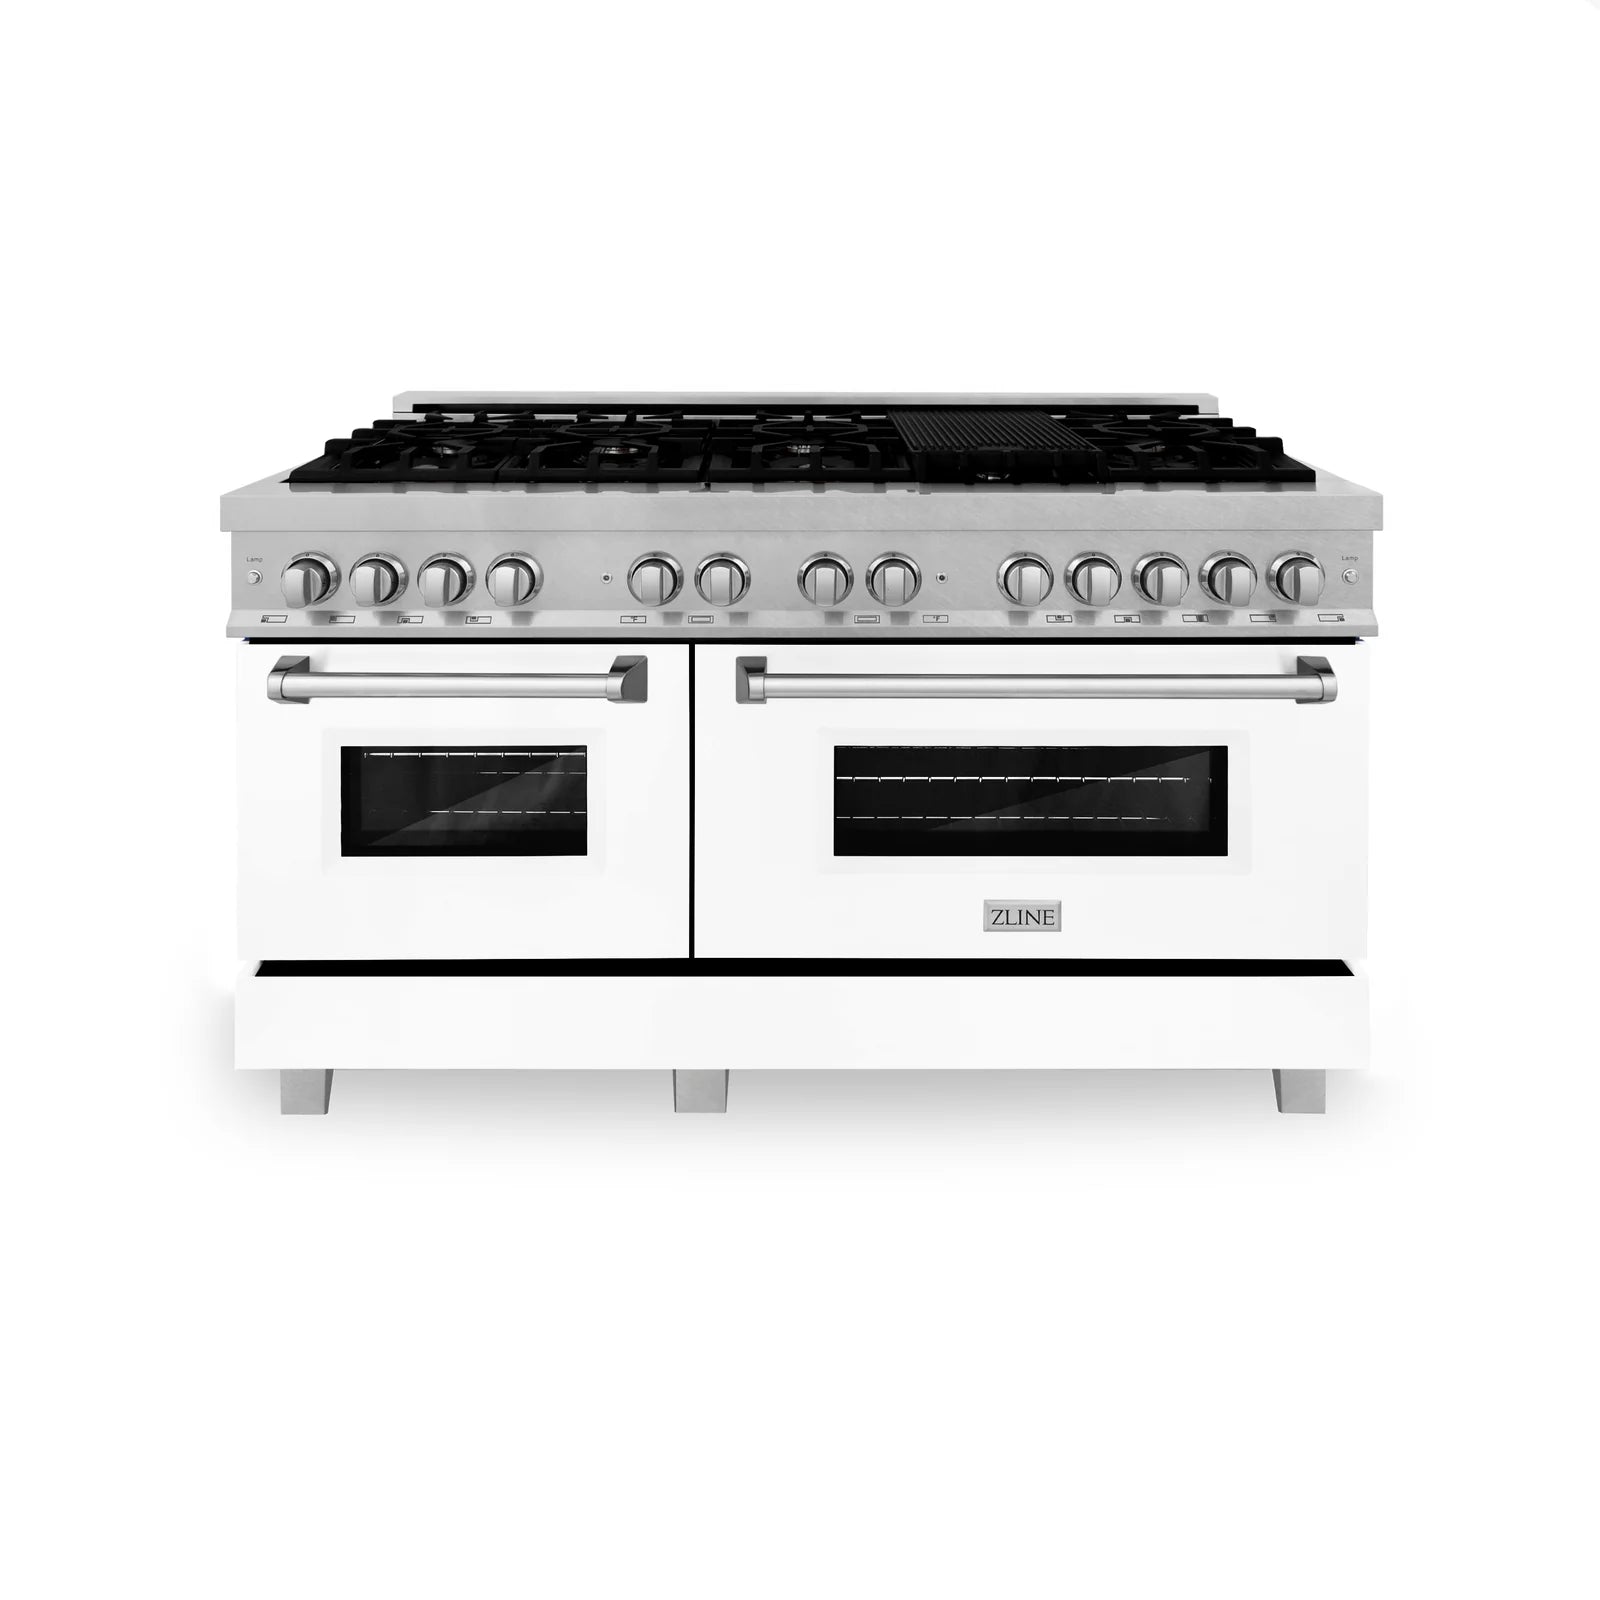 ZLINE 60-Inch Dual Fuel Range with 7.4 cu. ft. Electric Oven and Gas Cooktop and Griddle and White Matte Door in Fingerprint Resistant Stainless - RAS-WM-GR-60